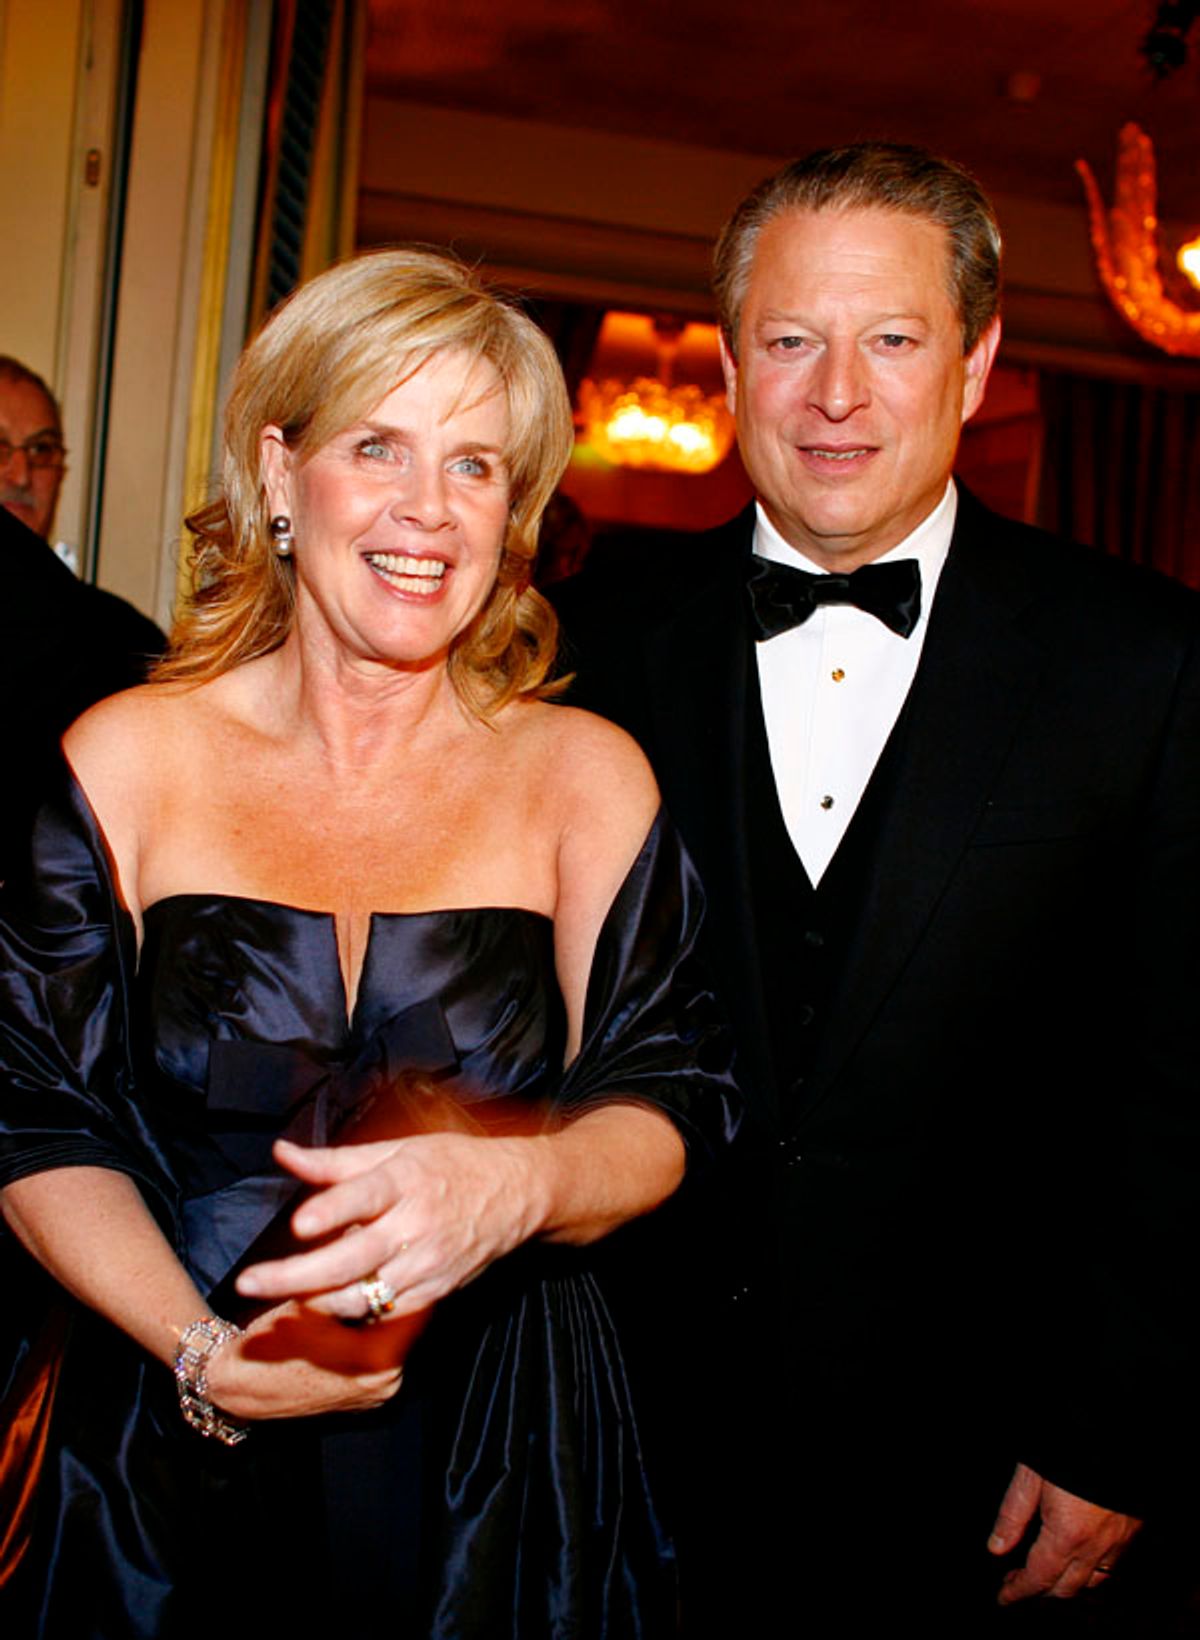 Nobel Peace Prize laureate Al Gore (R) and his wife Tipper arrive to attend the Nobel Banquet at the Grand Hotel in Oslo December 10, 2007.  .

REUTERS/Sara Johannessen/Scanpix  (NORWAY)    NORWAY OUT. NO COMMERCIAL USE (Â© Scanpix Norway / Reuters)